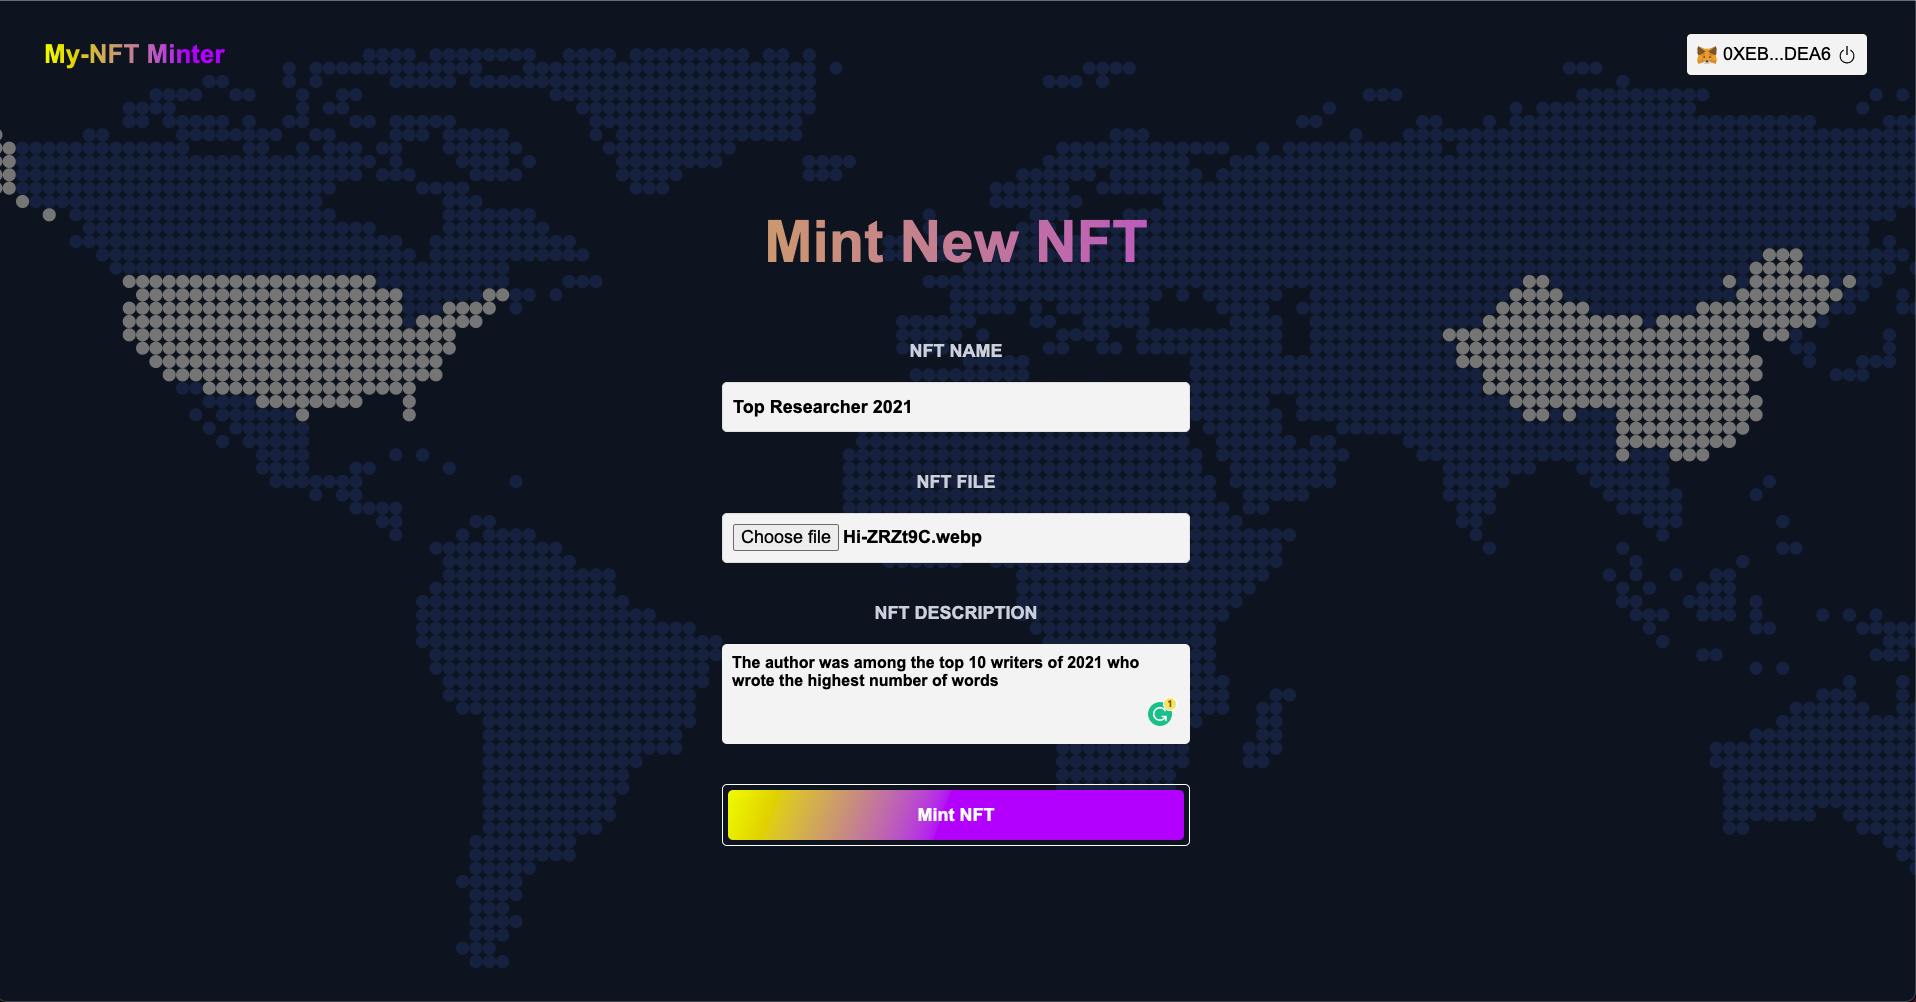 In order to mint an NFT, the name, description and the image of the digital asset must be provided